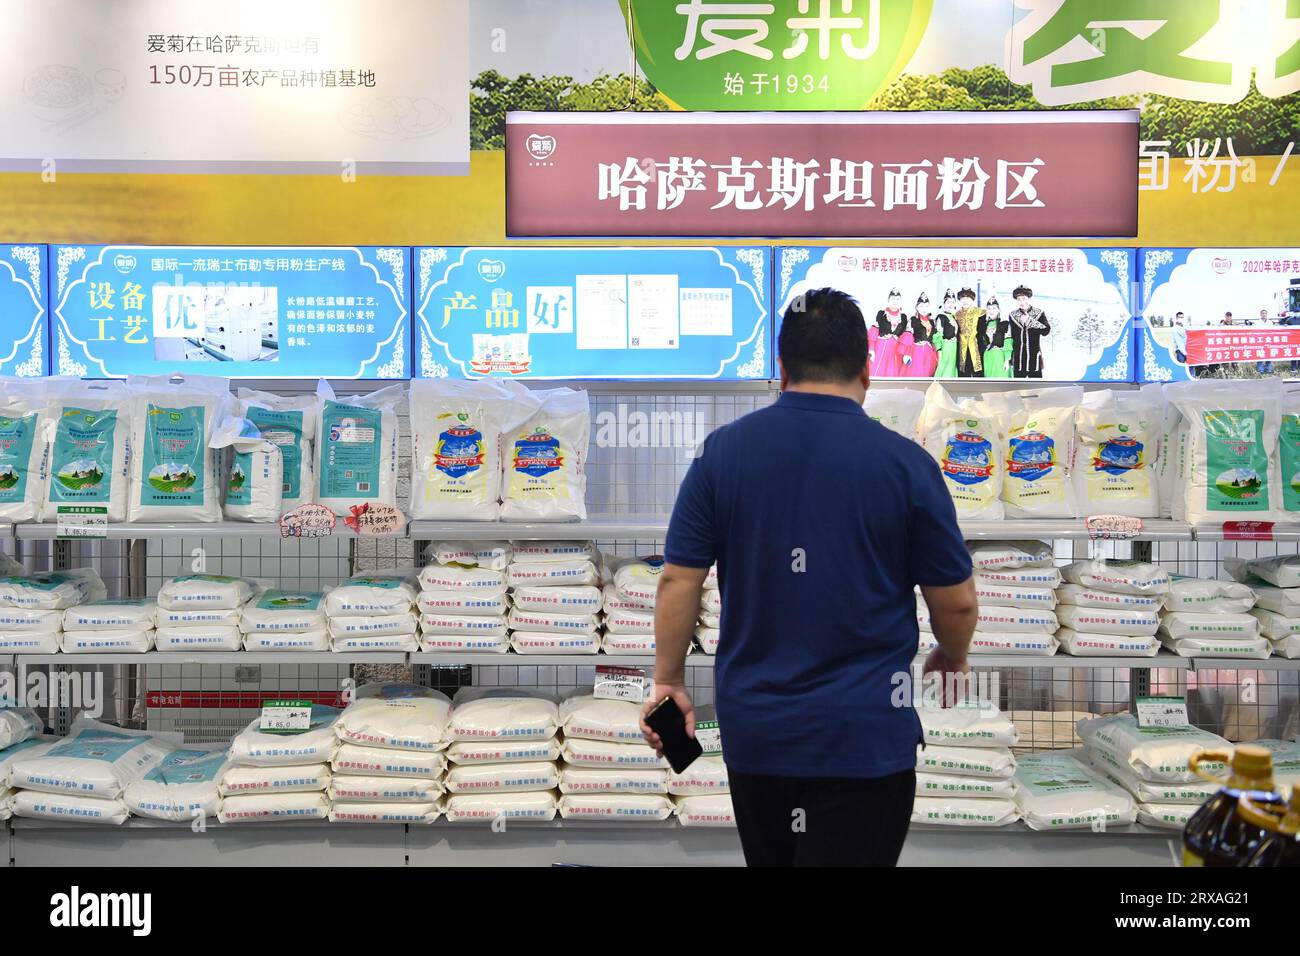 (230924) -- XI'AN, Sept. 24, 2023 (Xinhua) -- A customer looks at imported flour transported from abroad via the Chang'an China-Europe freight trains at a supermarket near Xi'an International Port in Xi'an, northwest China's Shaanxi Province, Sept. 22, 2023. The Chang'an China-Europe freight train service was launched in 2013, when China proposed the Belt and Road Initiative. In the past ten years, Xi'an International Port, the starting station of the Chang'an China-Europe freight trains, has been developed from a small cargo station to an international logistic hub. (Xinhua/Shao Rui) Stock Photo